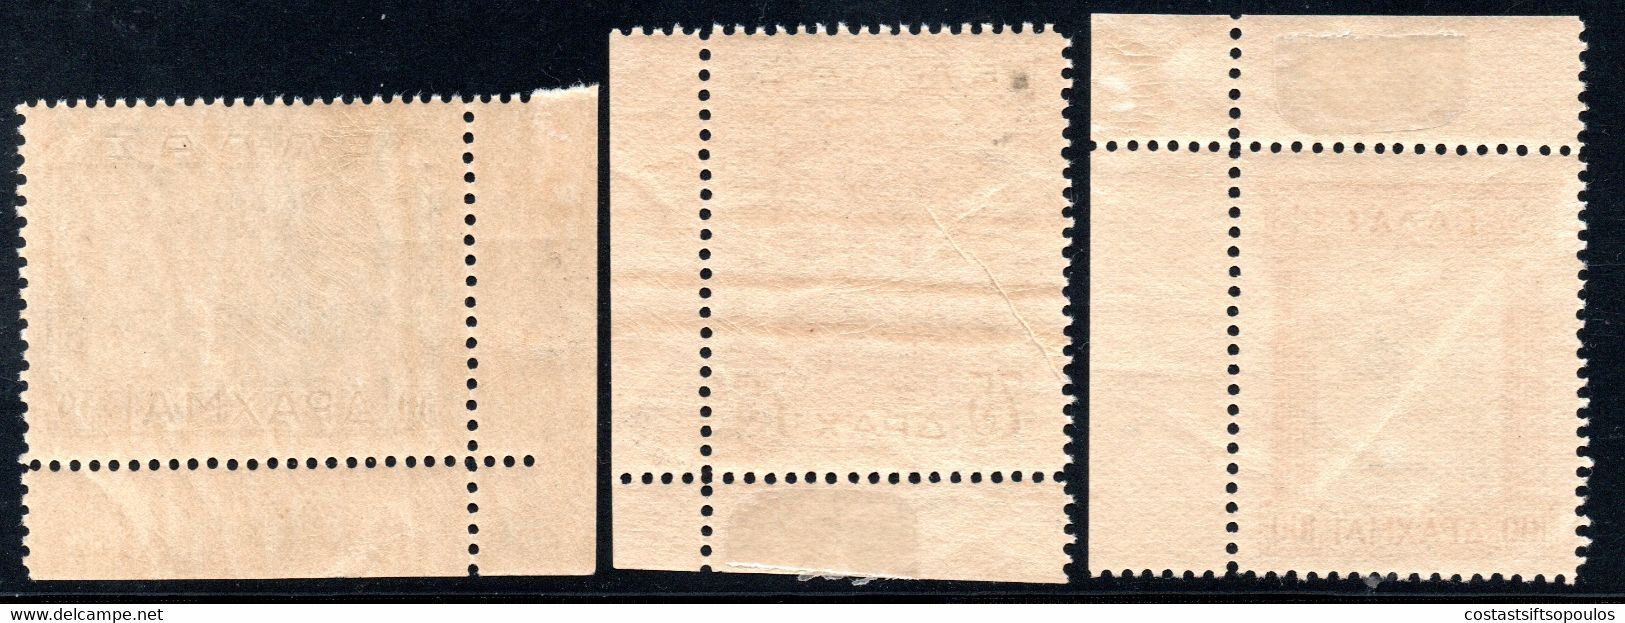 757.GREECE.1933 REPUBLIC.HELLAS 523-525,SC.378-380 MNH(HINGED IN MARGINS)75 DR. LIGHT GUM BLEMISHES,100 DR.LIGHT CREASE - Neufs